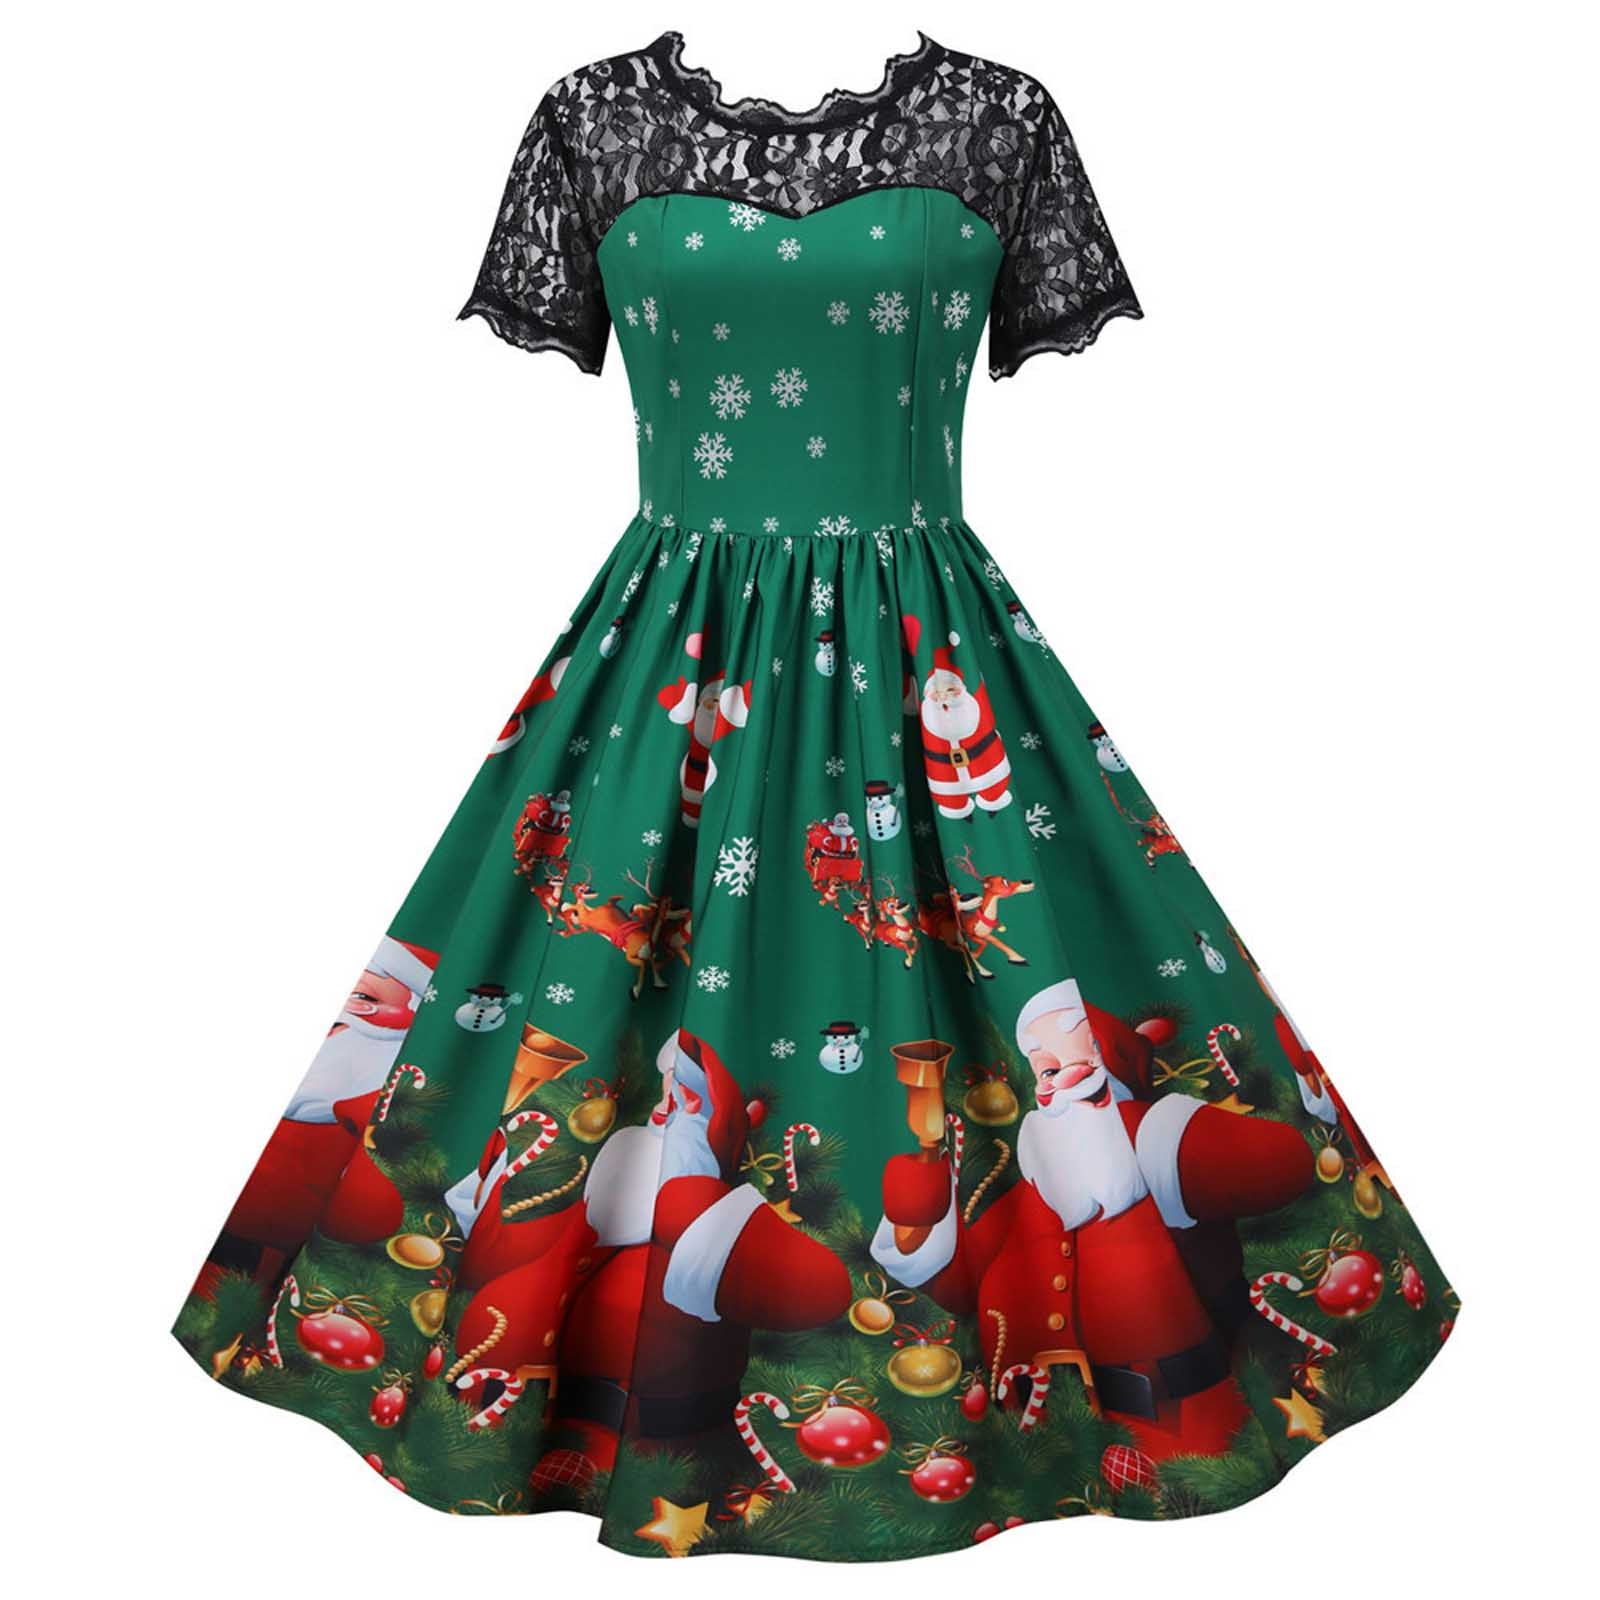 Womens Christmas Dress Reindeer Elk Striped Printed Xmas Holiday Pleated Dress 1950s Vintage V Neck Short Sleeves Evening Party High Waist A Line Dresses Casual Cocktail Prom Swing Gown